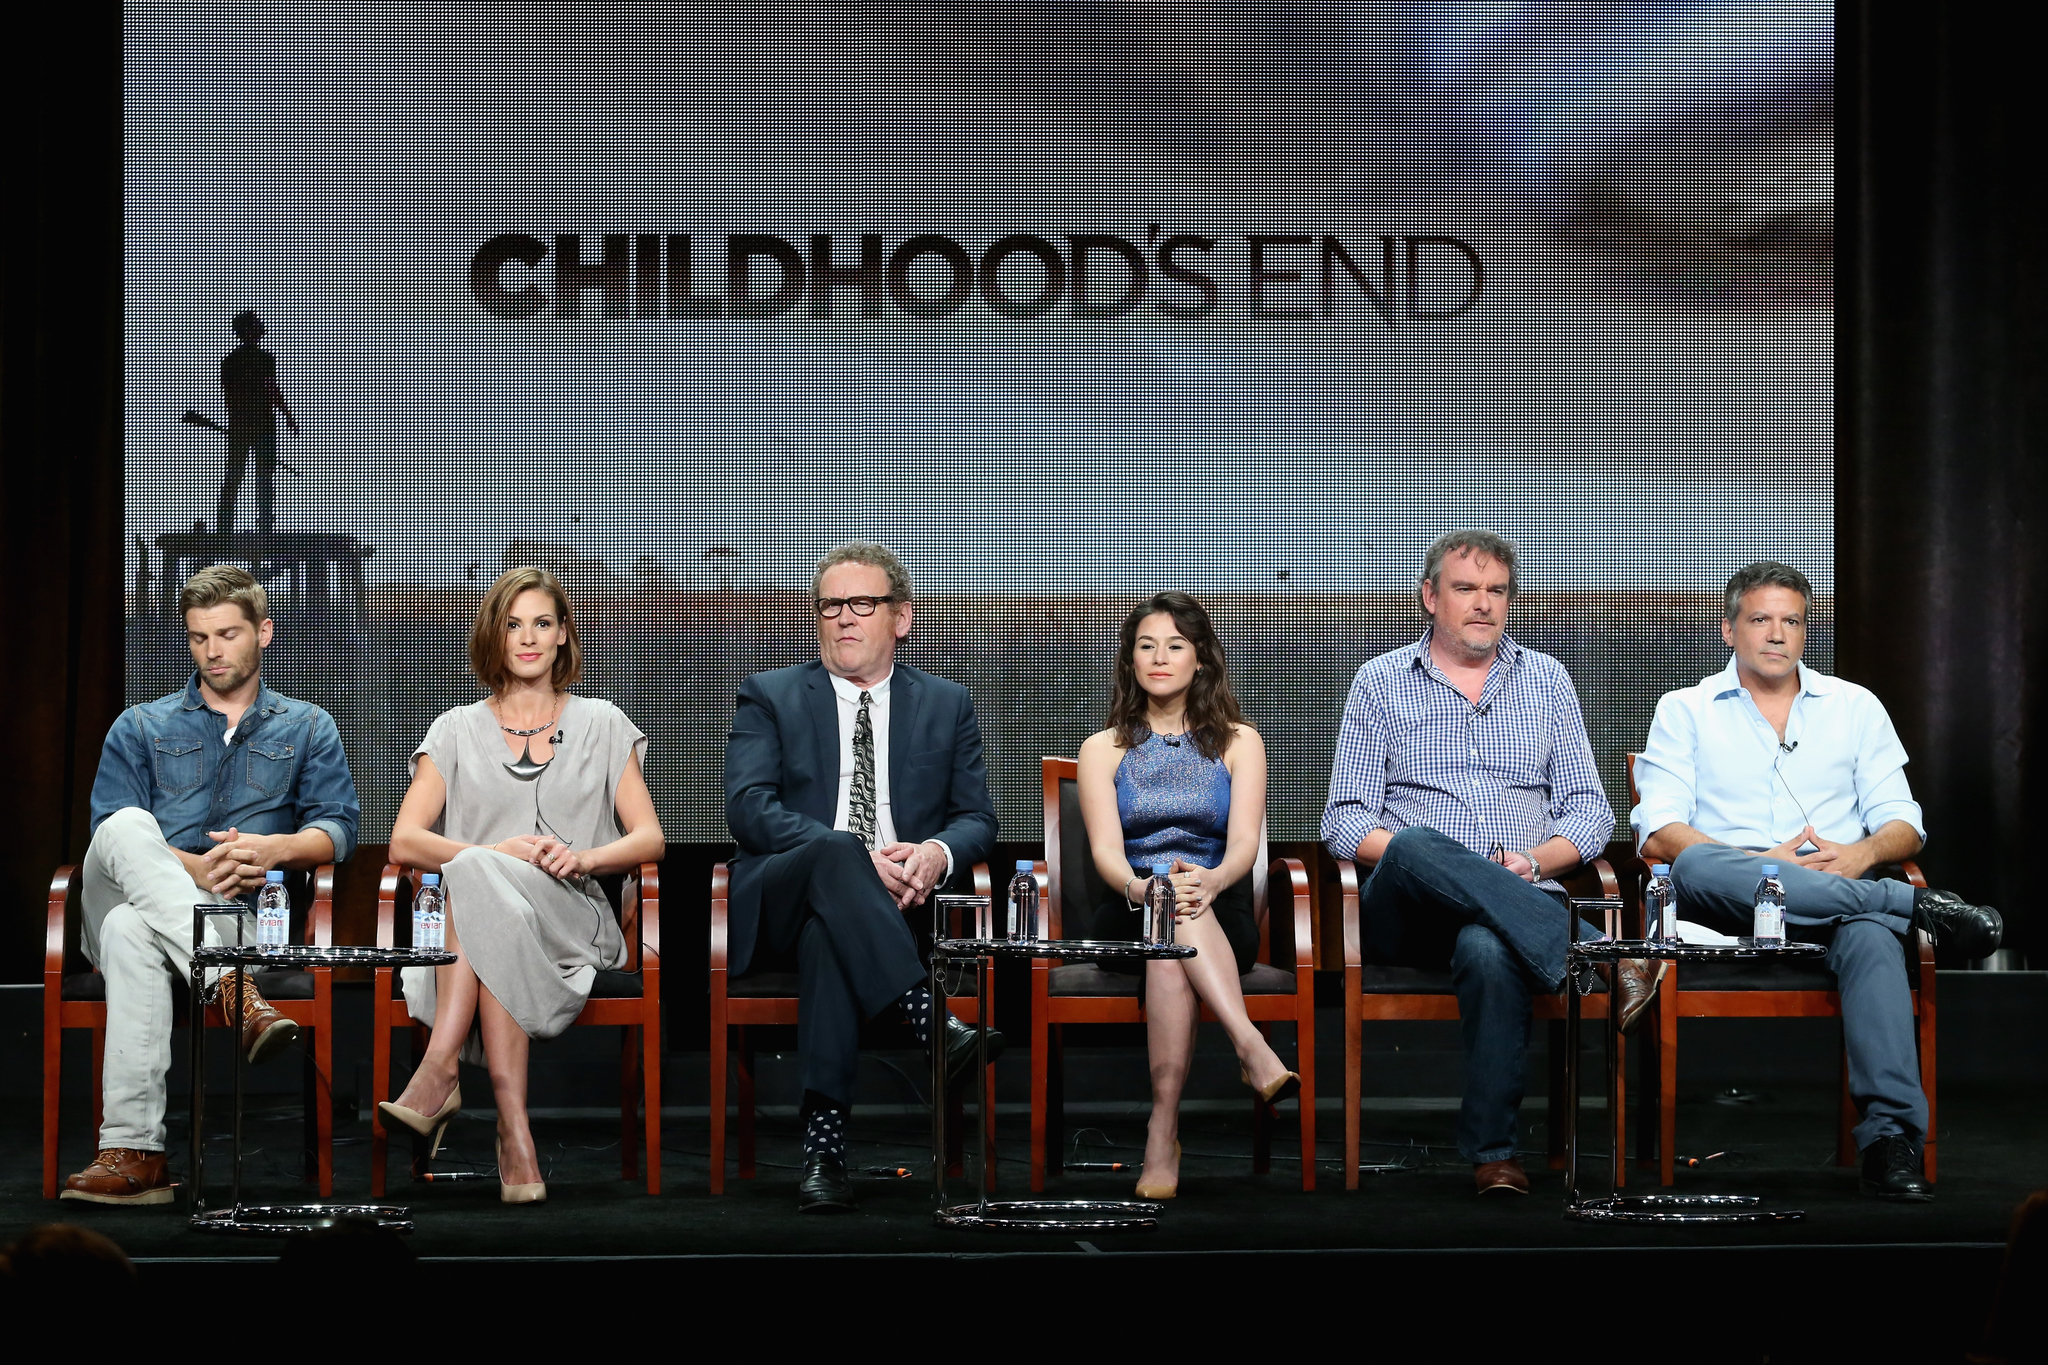 Colm Meaney, Michael De Luca, Matthew Graham, Yael Stone, Mike Vogel and Daisy Betts at event of Childhood's End (2015)